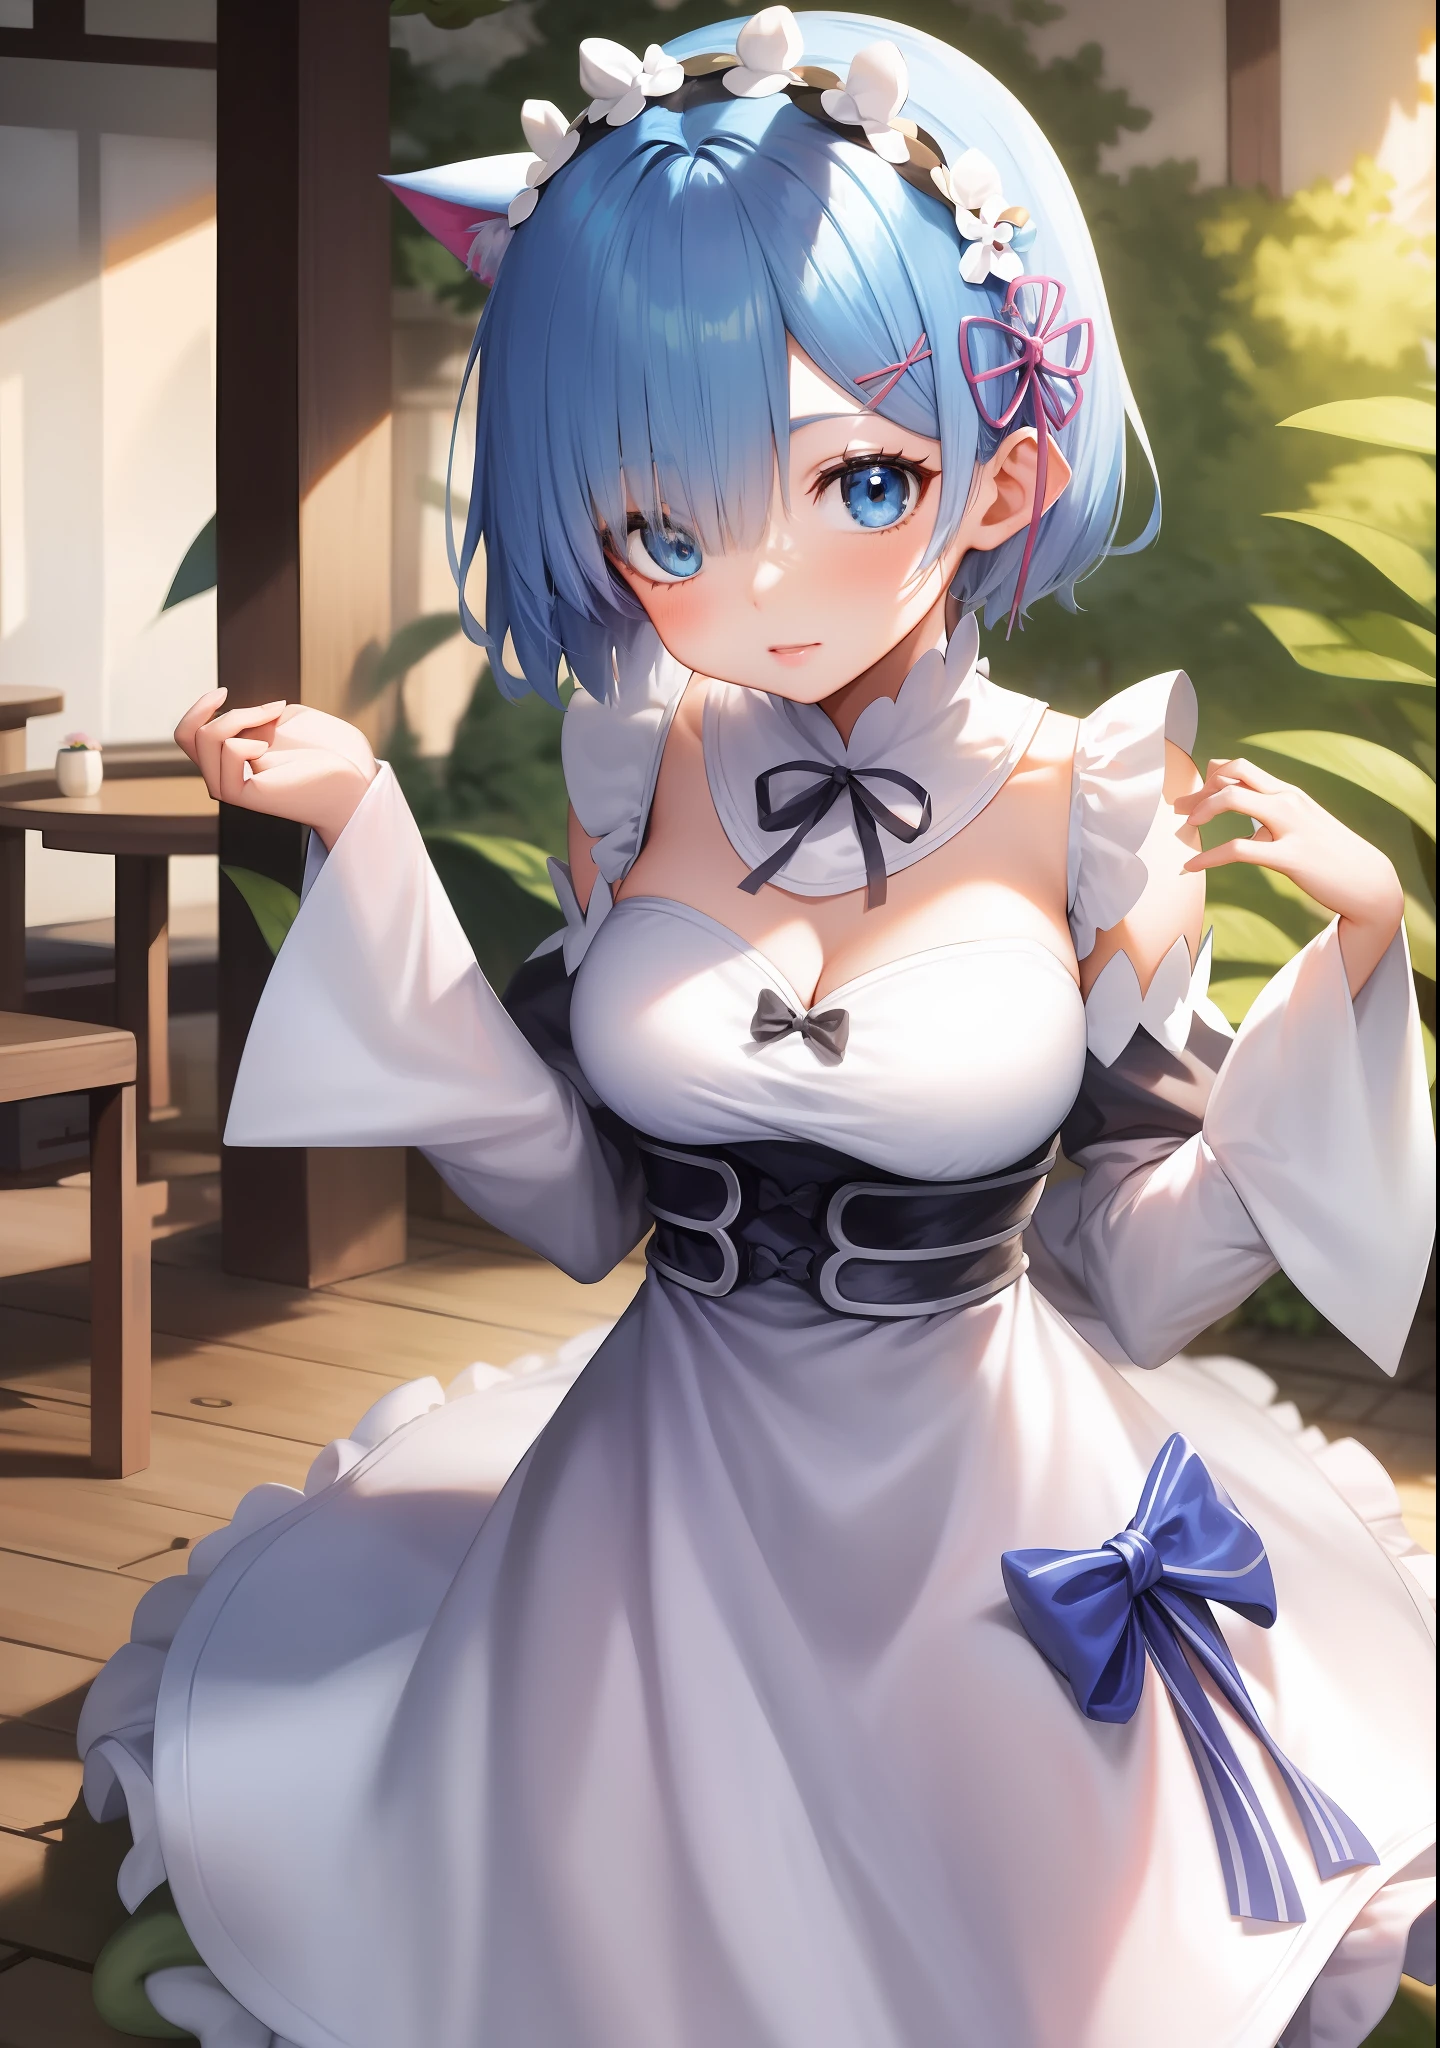 anime girl with blue hair and white dress holding a stuffed animal, Rem Rezero, short blue haired woman, Rei Ayanami, ayanami, anime moe art style, anime visual of a cute girl, ，Cat ears，Hand flowers